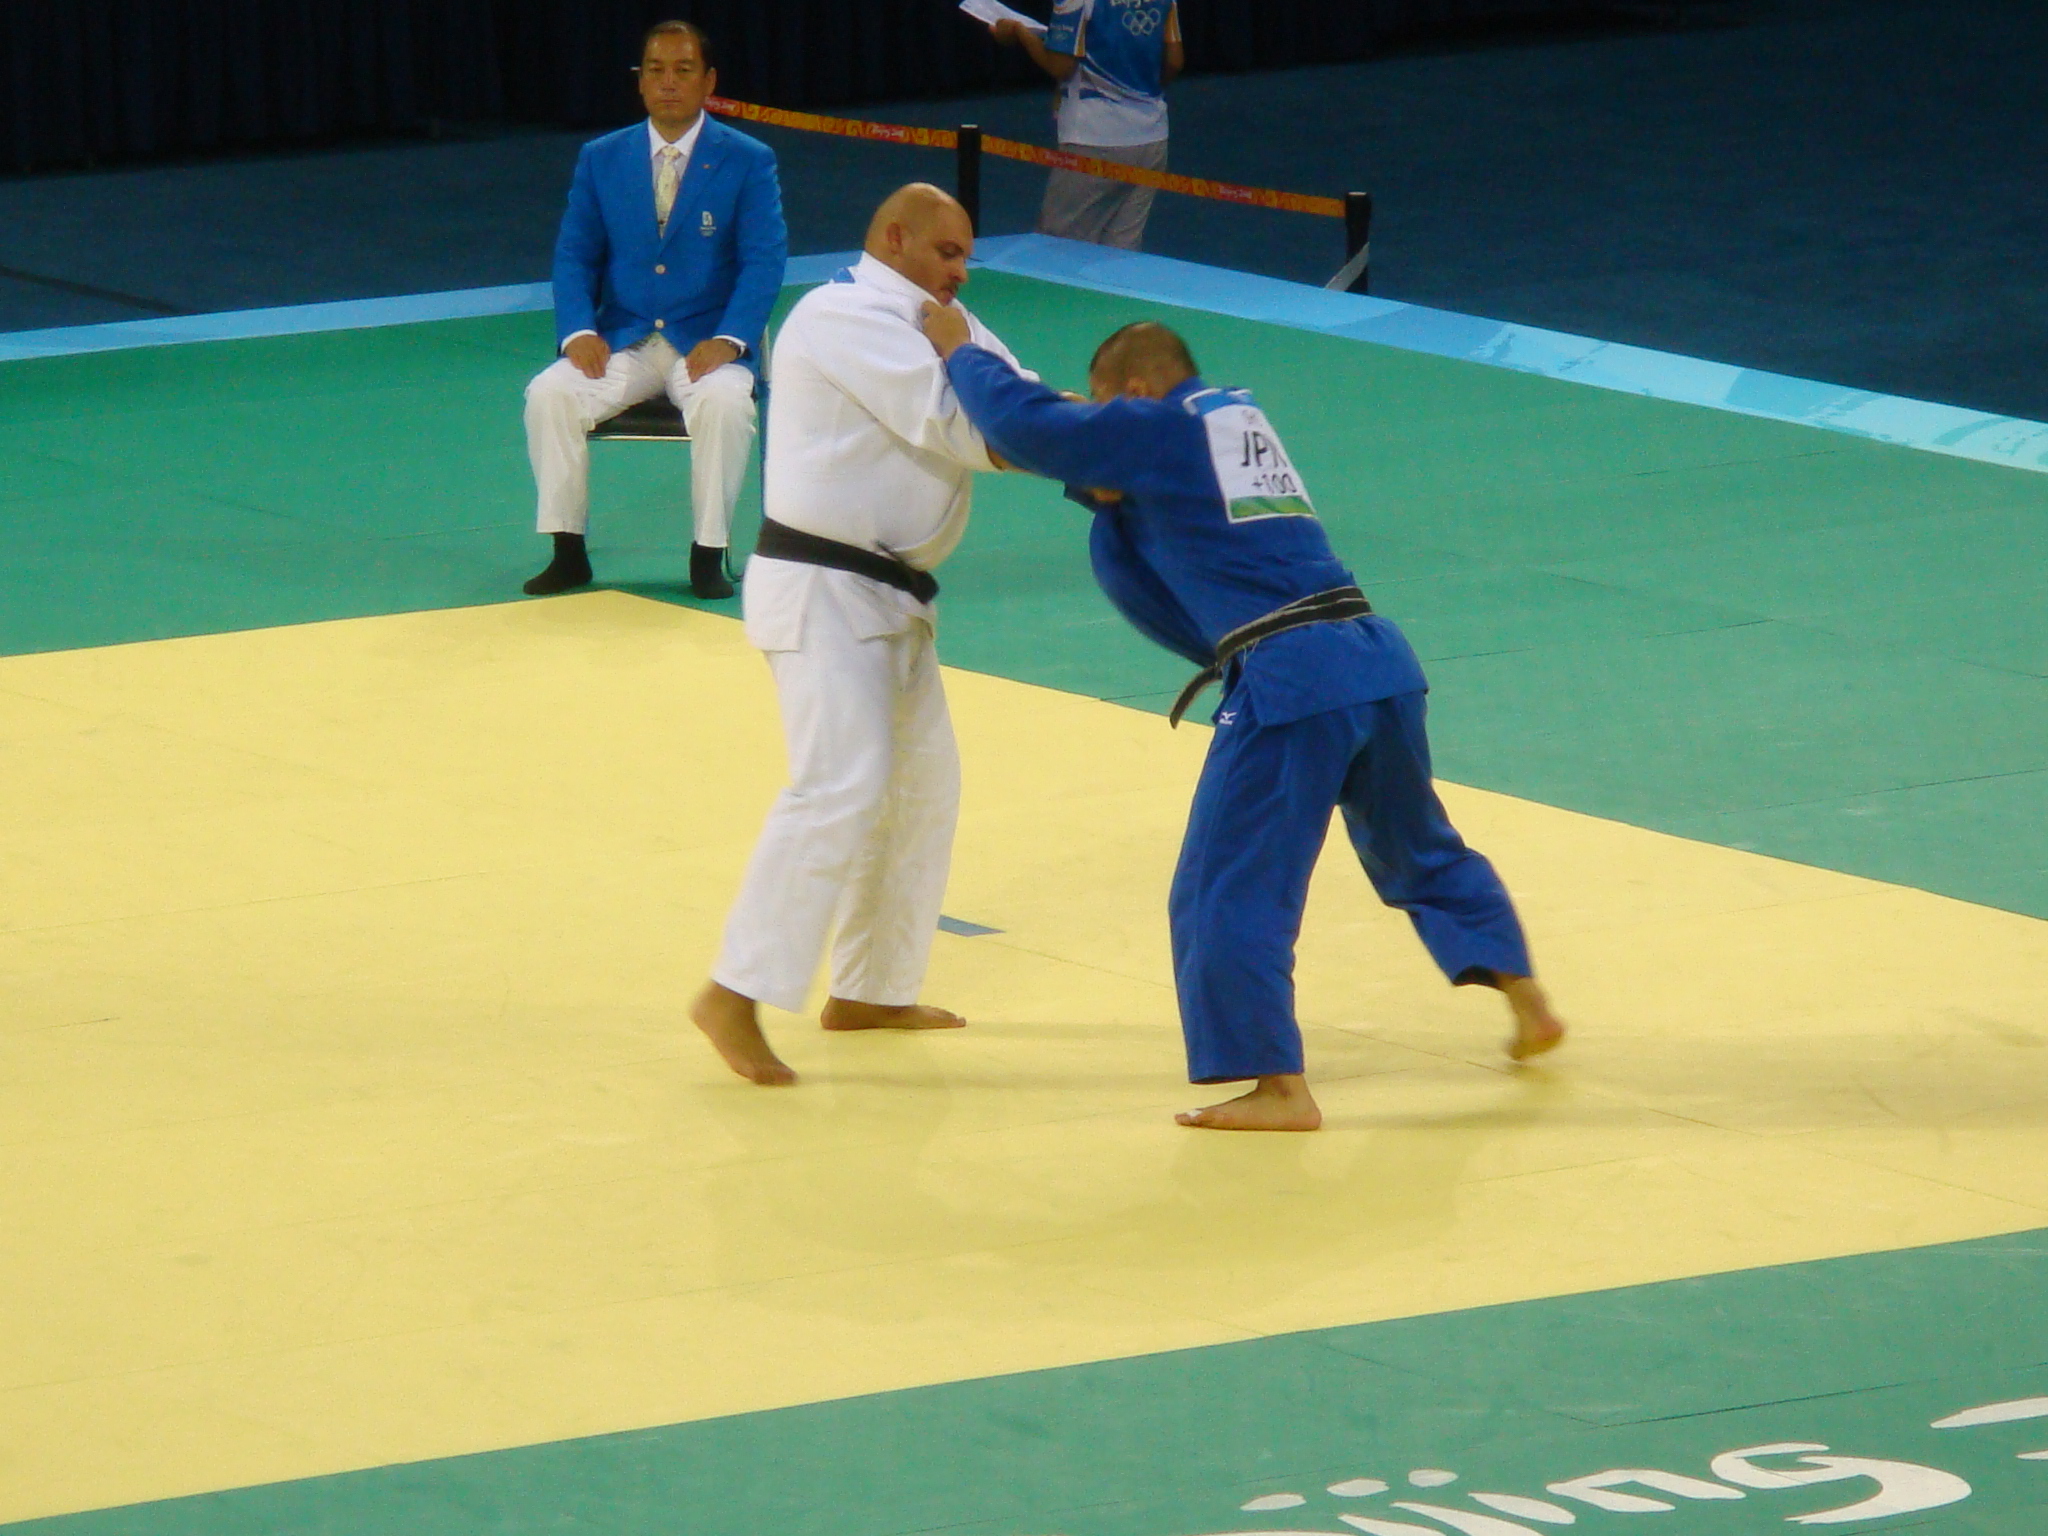 ishiis-first-match-against-bianchaisi-italy.jpg